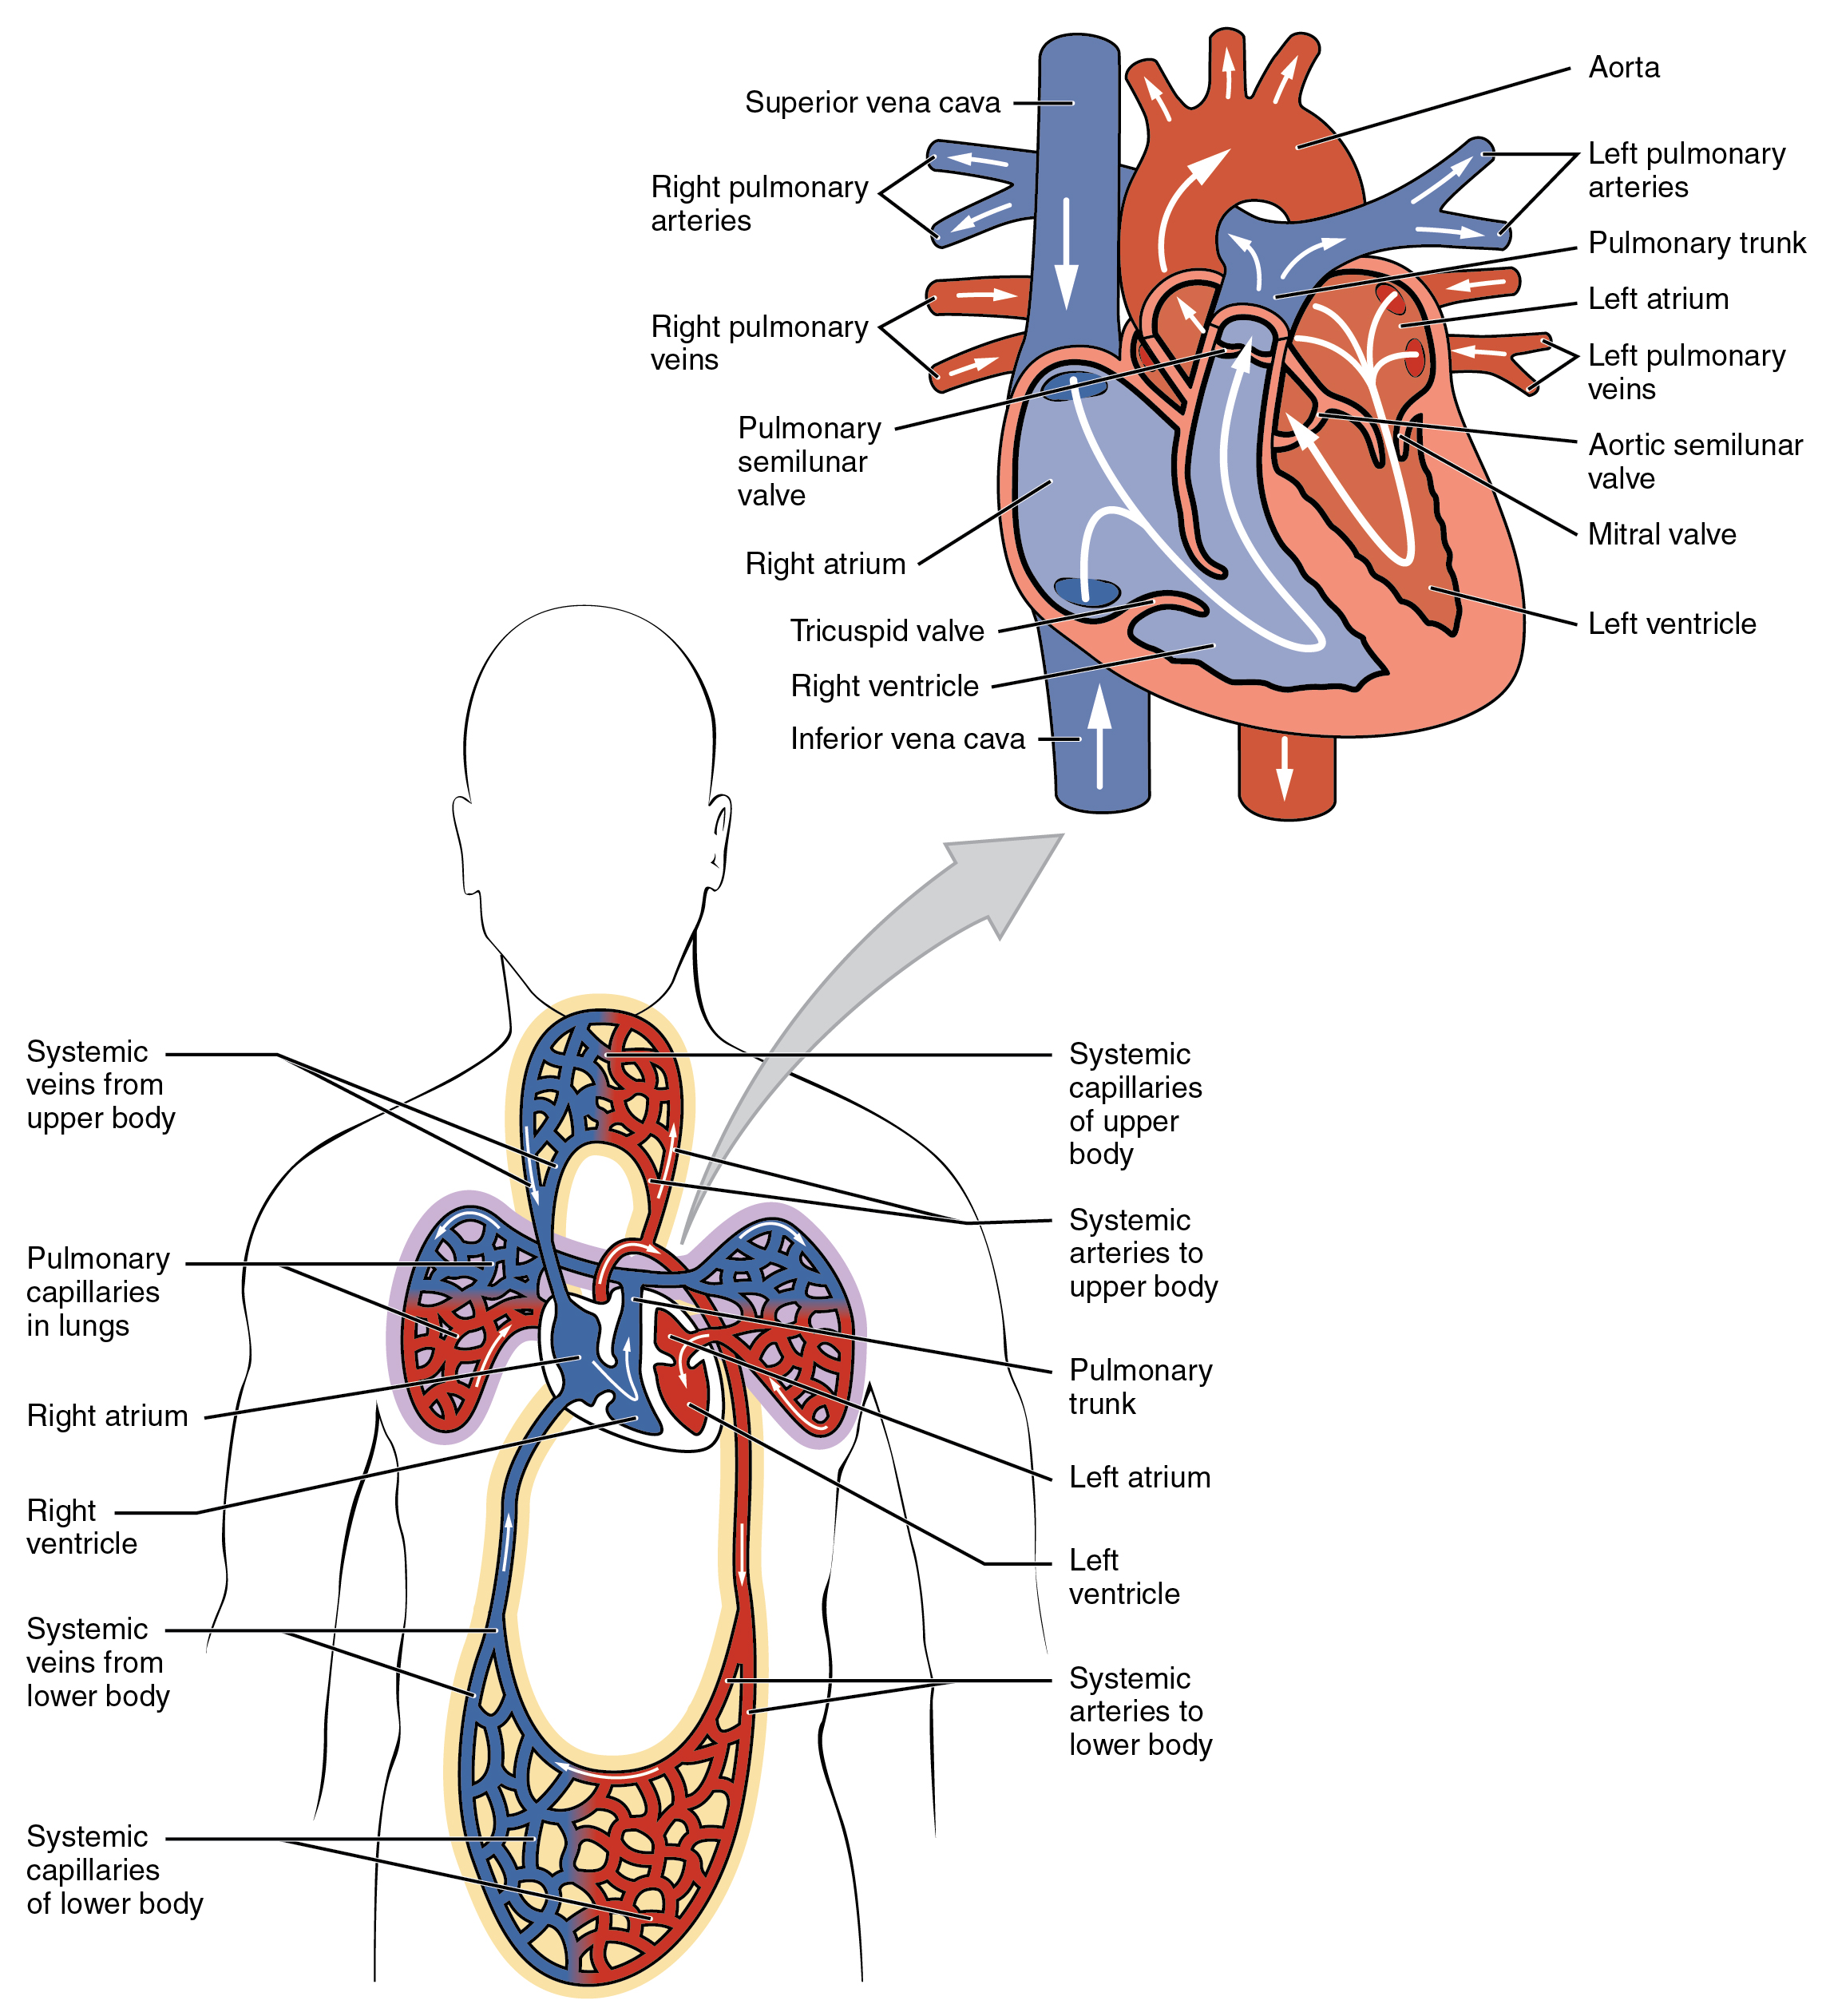 Labeled diagrams showing the flow of blood in the two major circuits of blood flow in the human Body. In the pulmonary circuit, blood flows from the right side of the heart to the lungs to pick up oxygen and returns to the left side of the heart. In the systemic circuit, blood flows from the left side of the heart to deliver oxygen to the tissues of the body and returns to the right side of the heart.